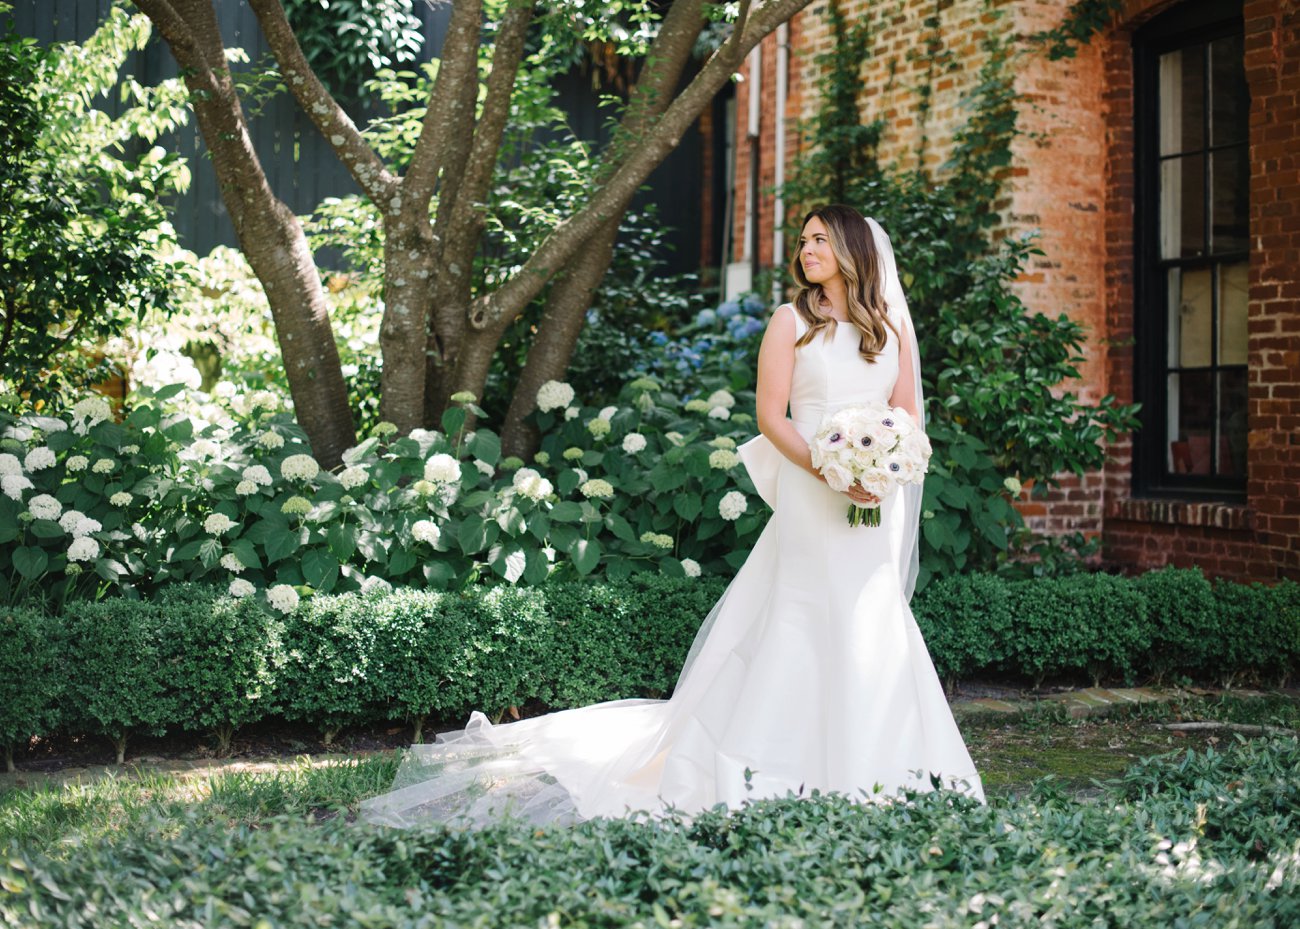 Bride outside historic southern brick building